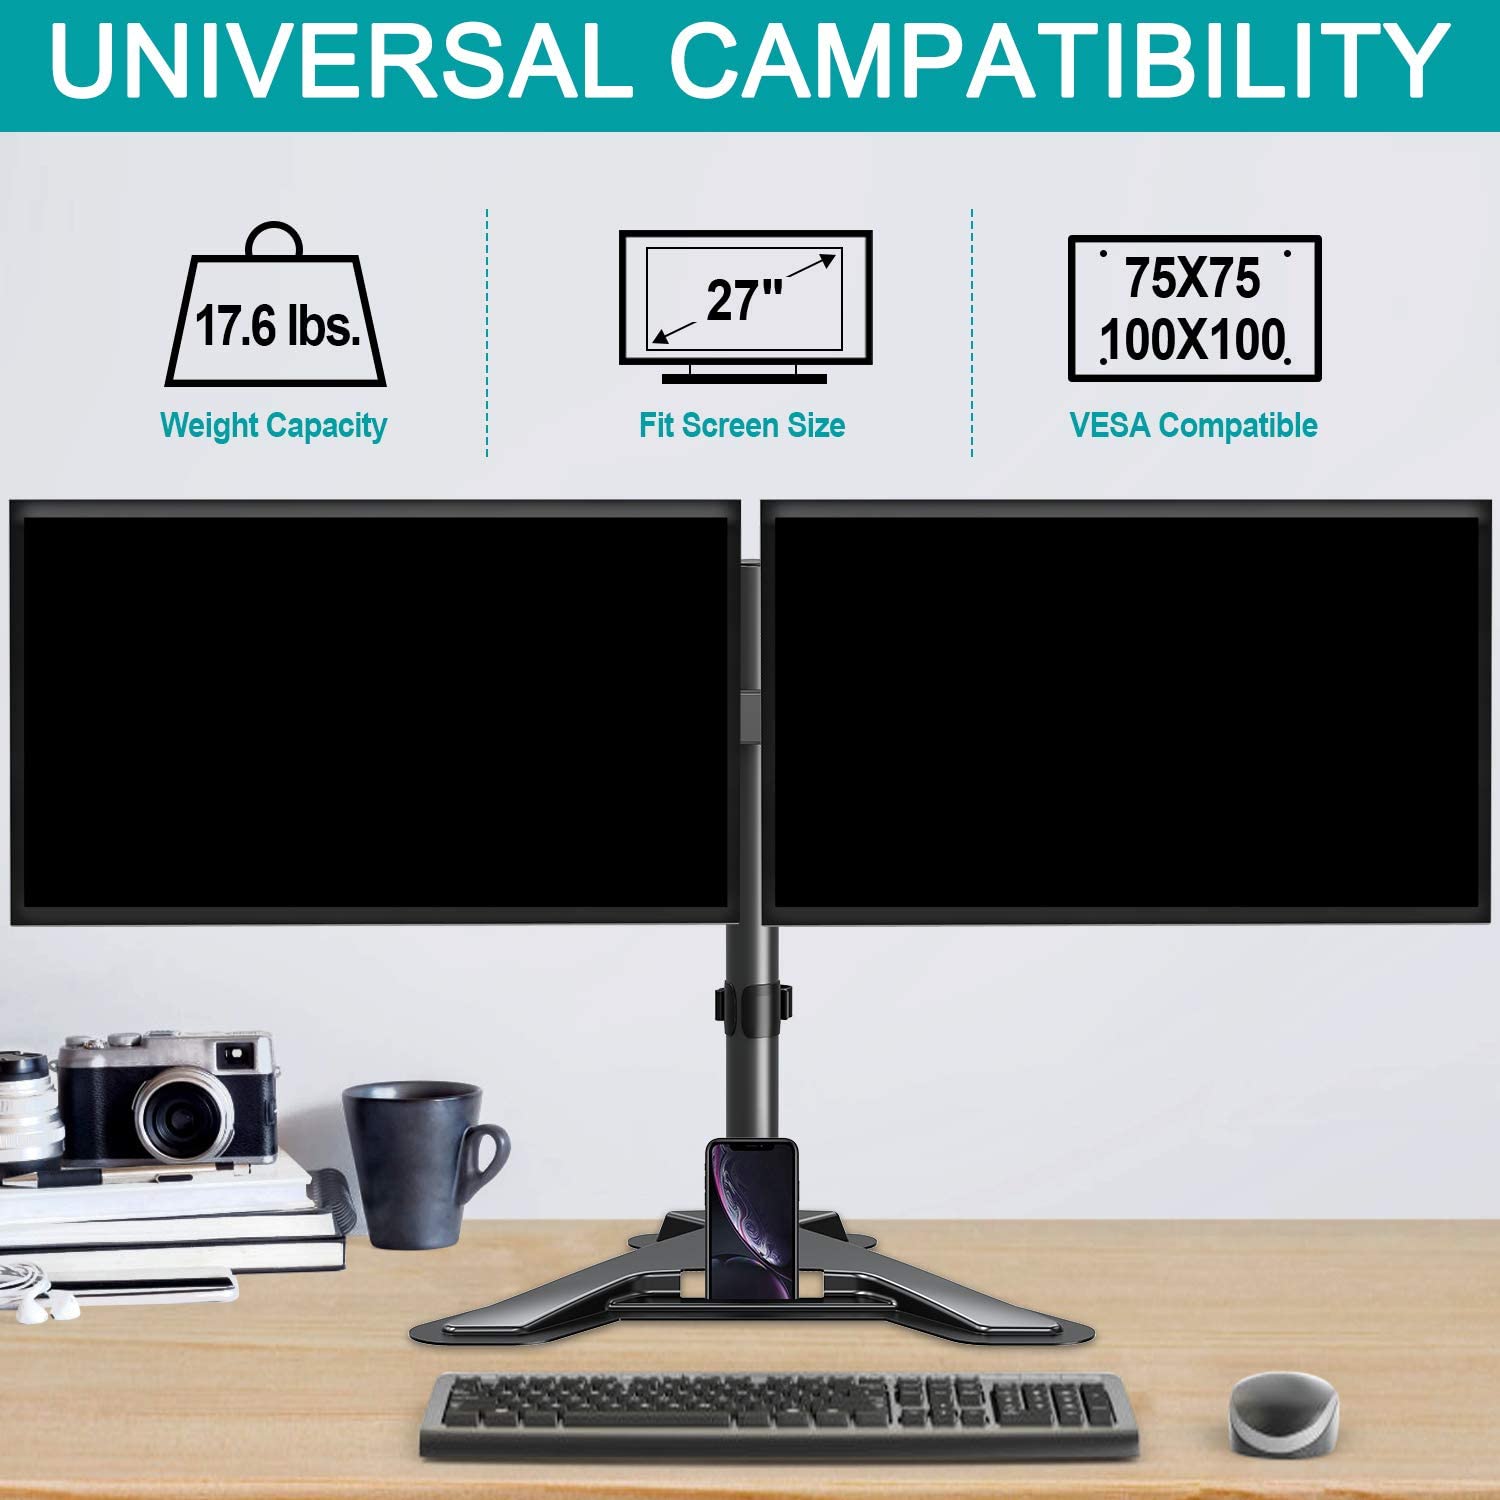 Dual Arms universal dual monitor stand for computer monitor screens up to 27'' loading up to 17.6 lbs.